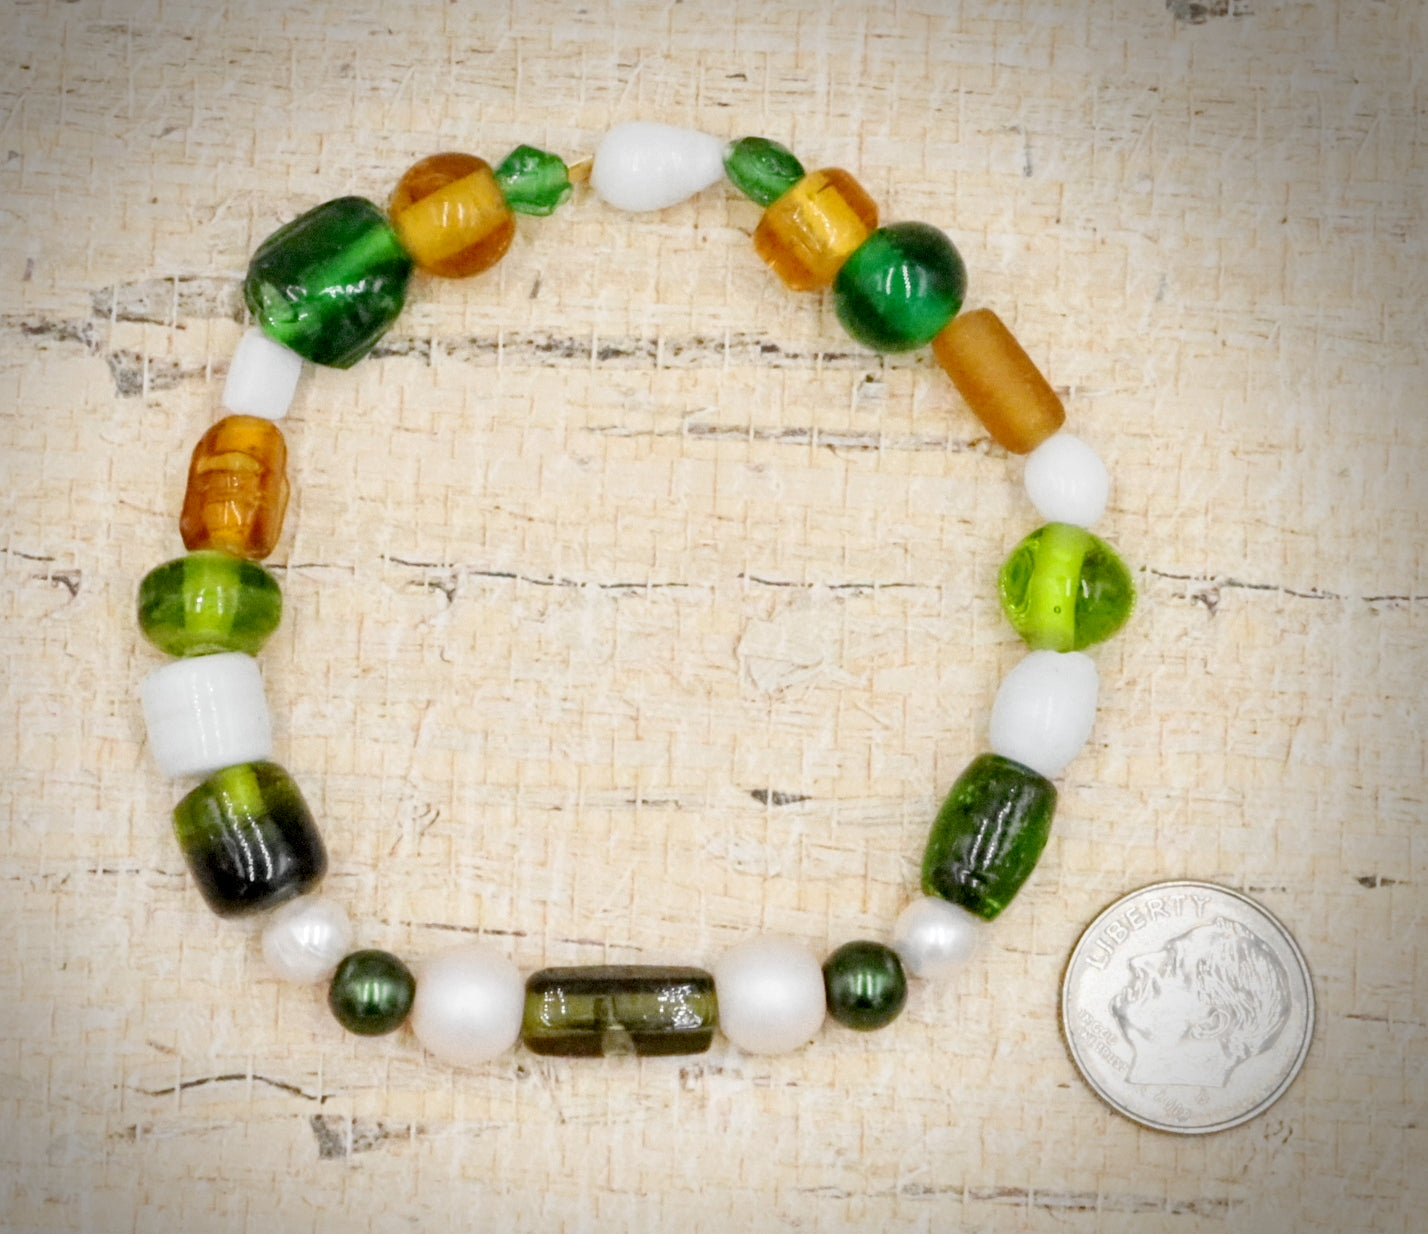 Green and White Bold and Large Sorted Artisan Glass Beads of Bracelet by Monkeys Mojo